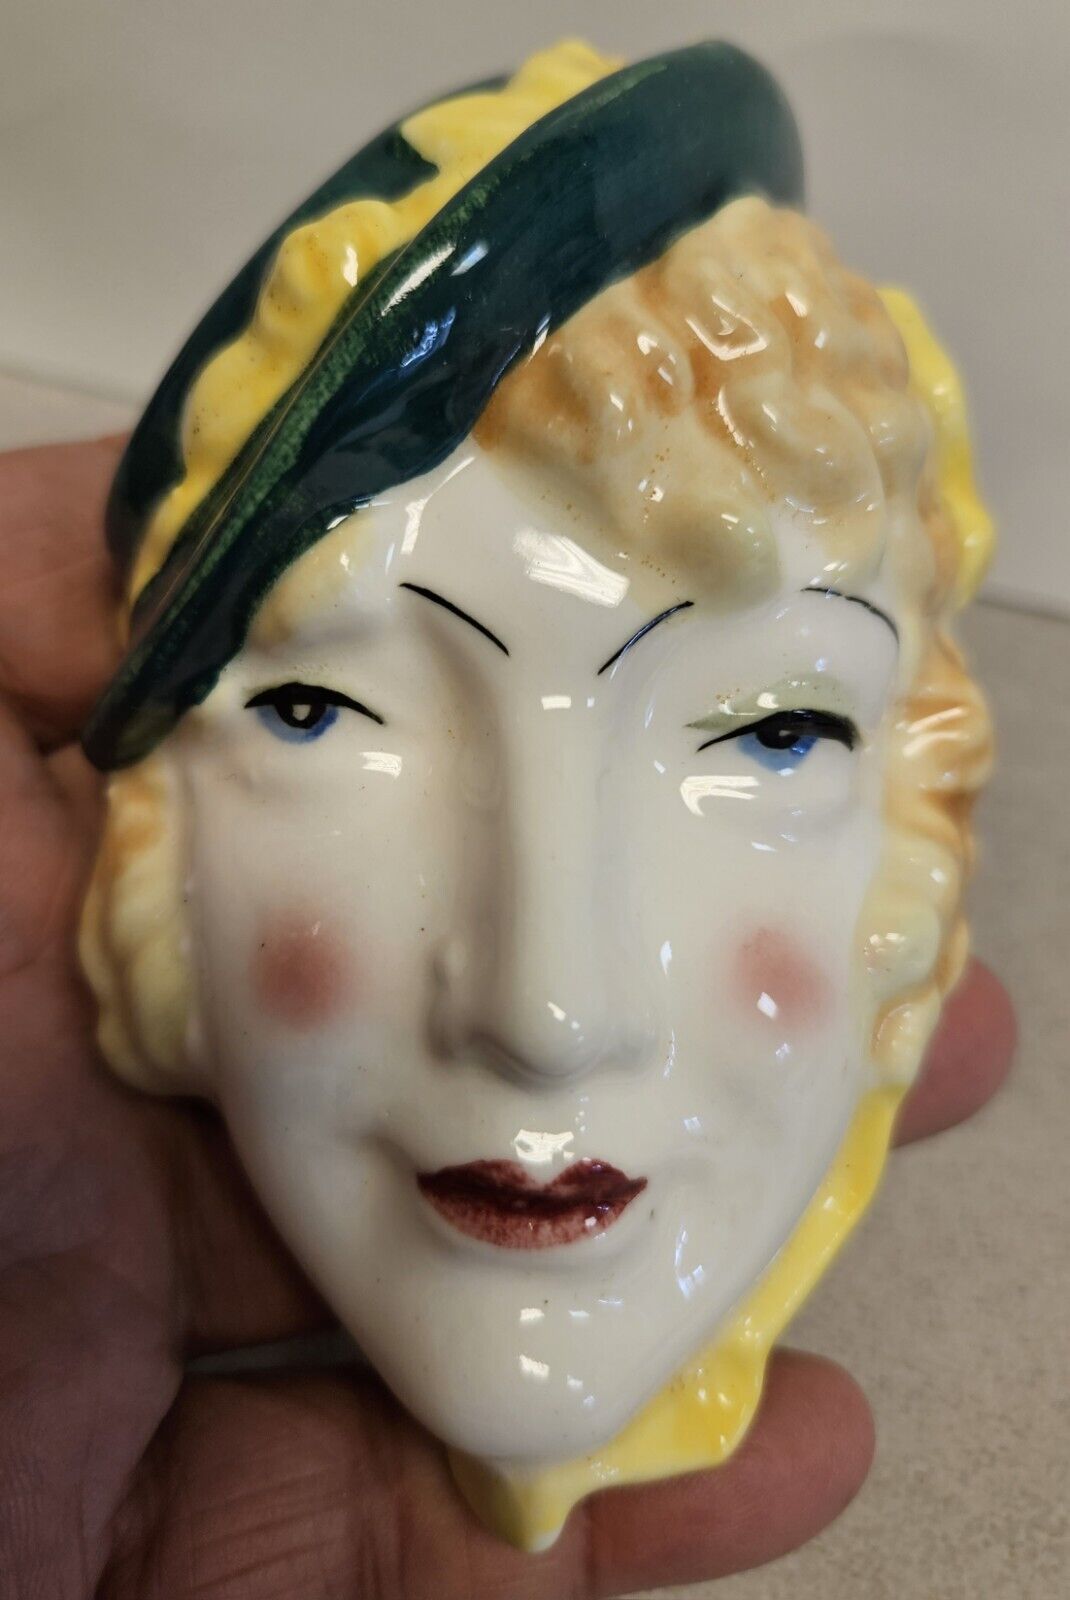 Vintage 1940s ART DECO Lady with Hat Head Face Porcelain Wall Plaque Pre WWII